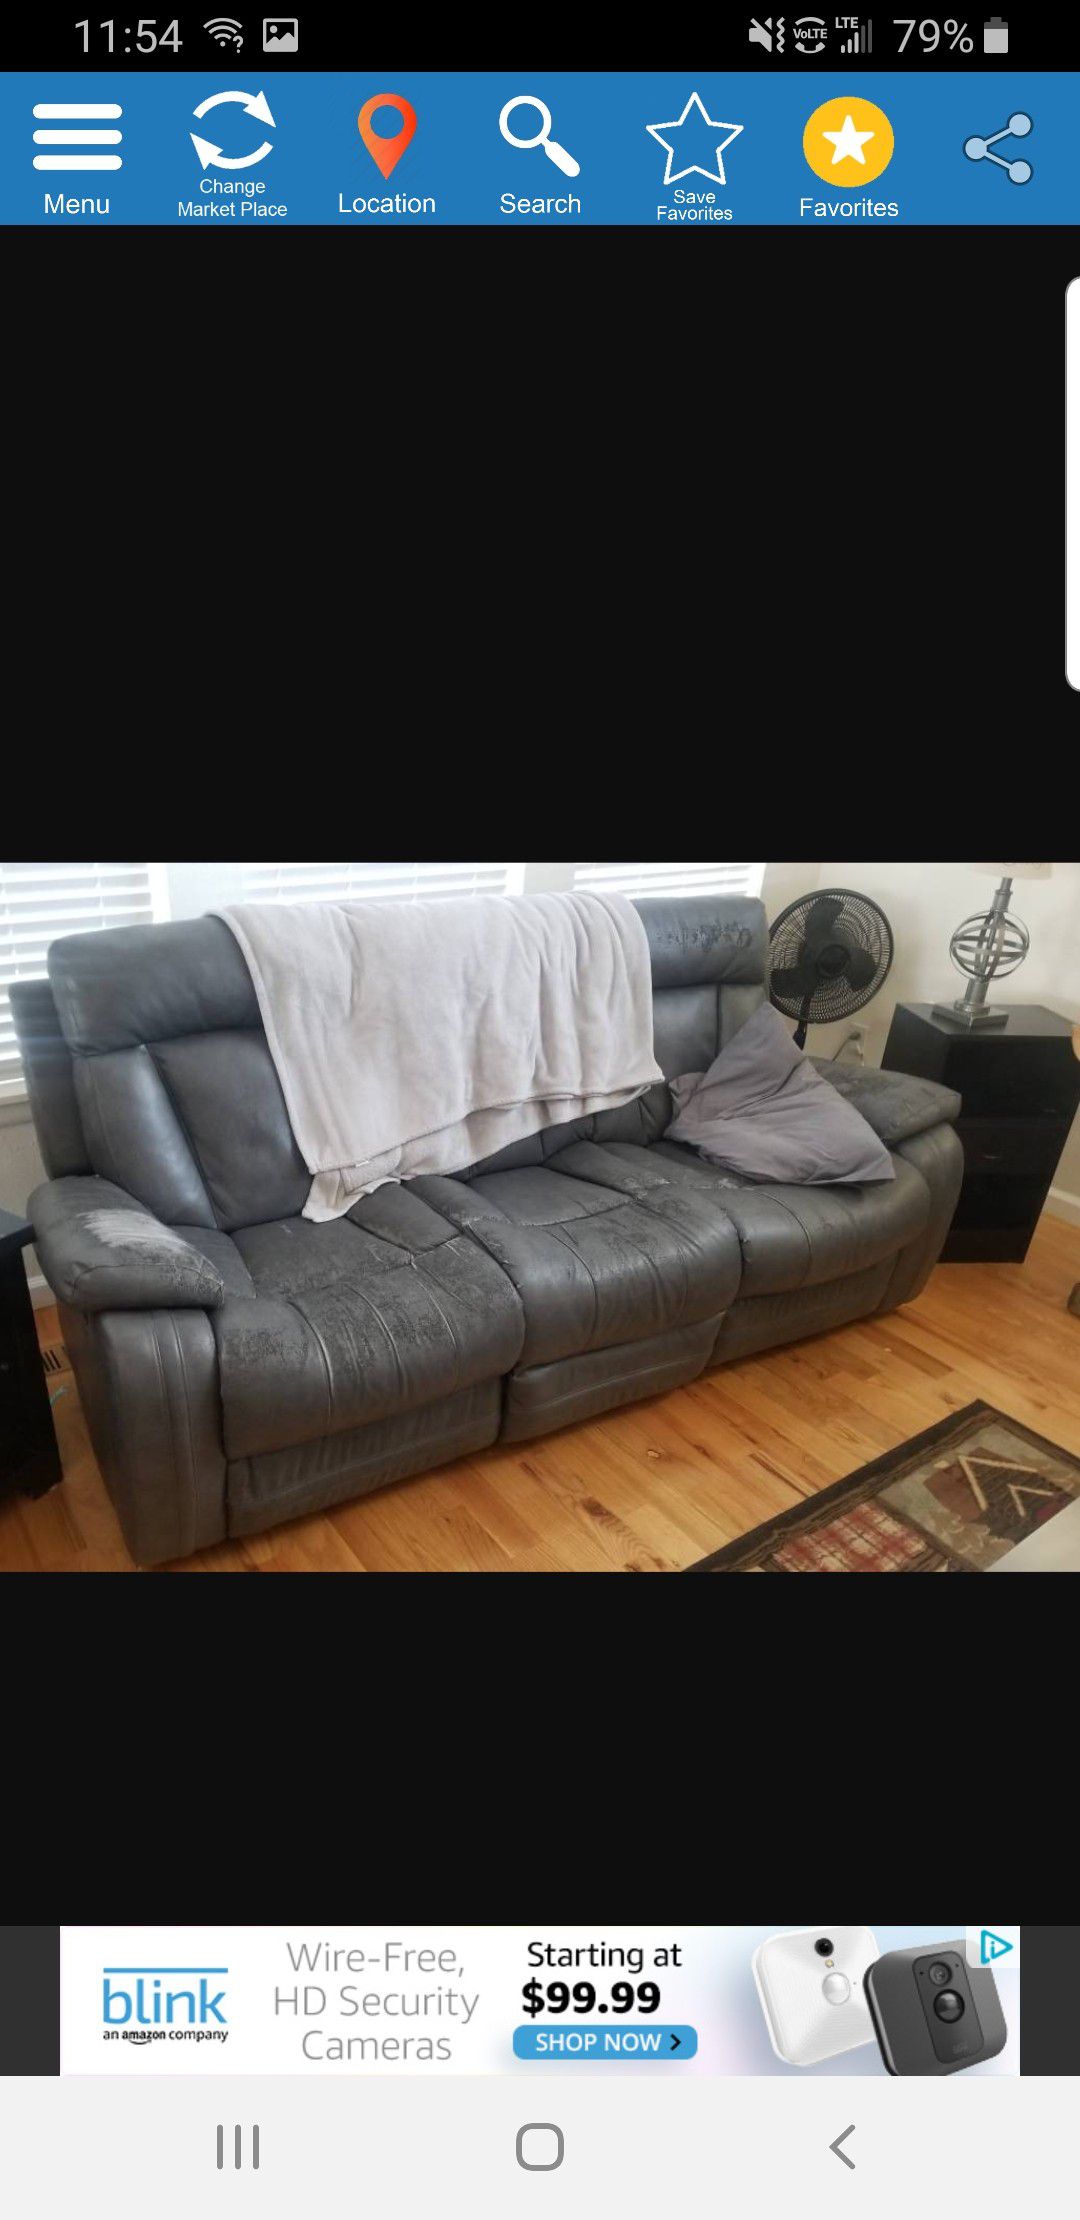 Free couches(2). Grey leather. 4 recliners in them. Rockers. Center counsel with cup holders and storage.